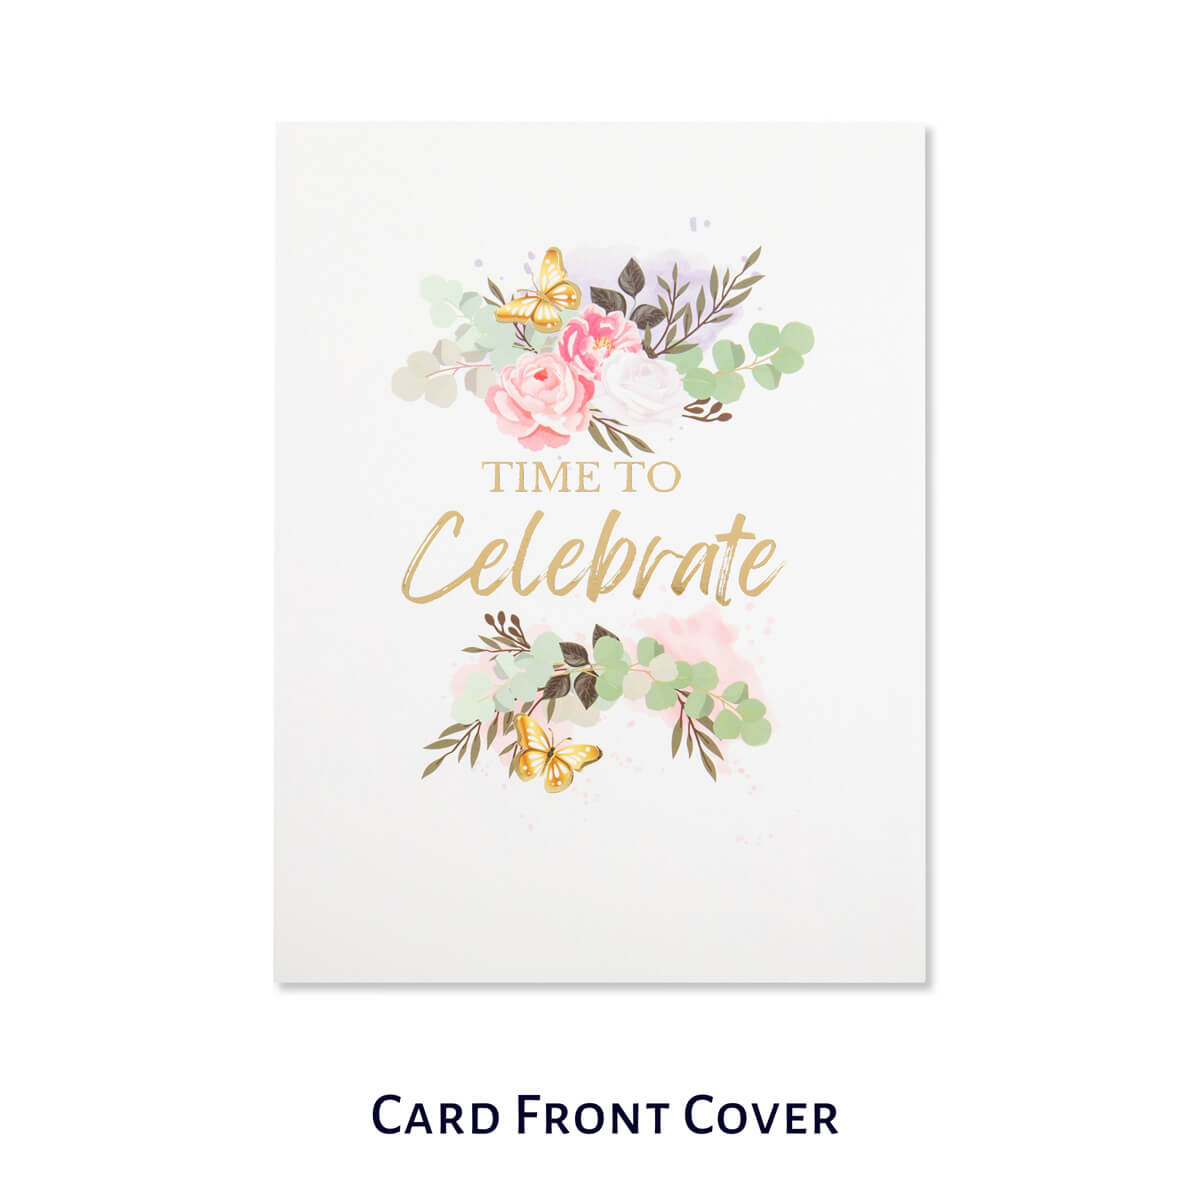 close up image of celebratory love pop up card which is perfect as a wedding card, engagement card or anniversary card - by Cardology